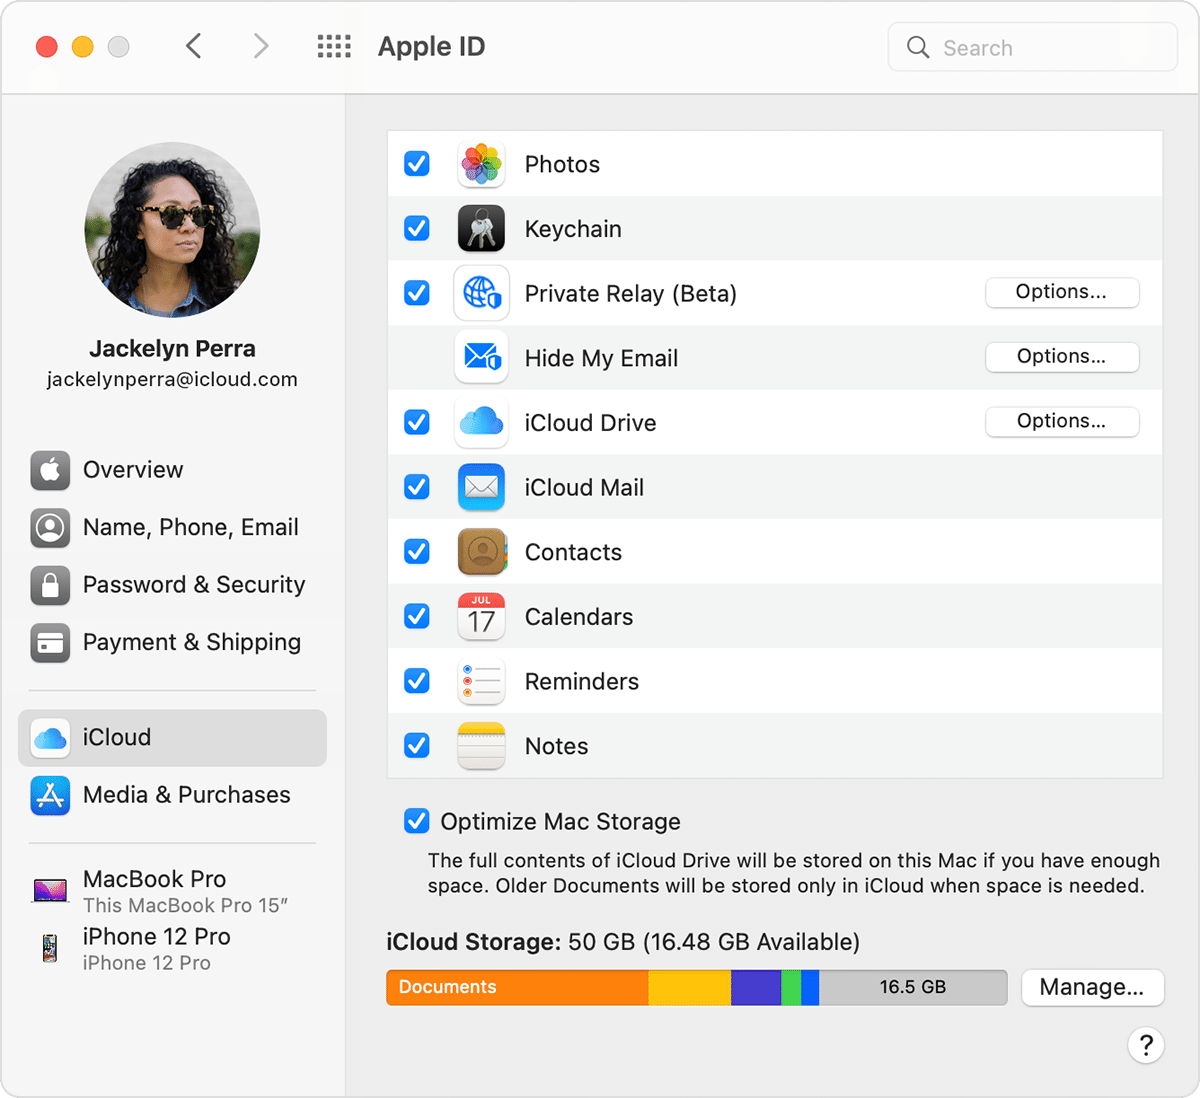 Manage your iCloud storage on Mac.